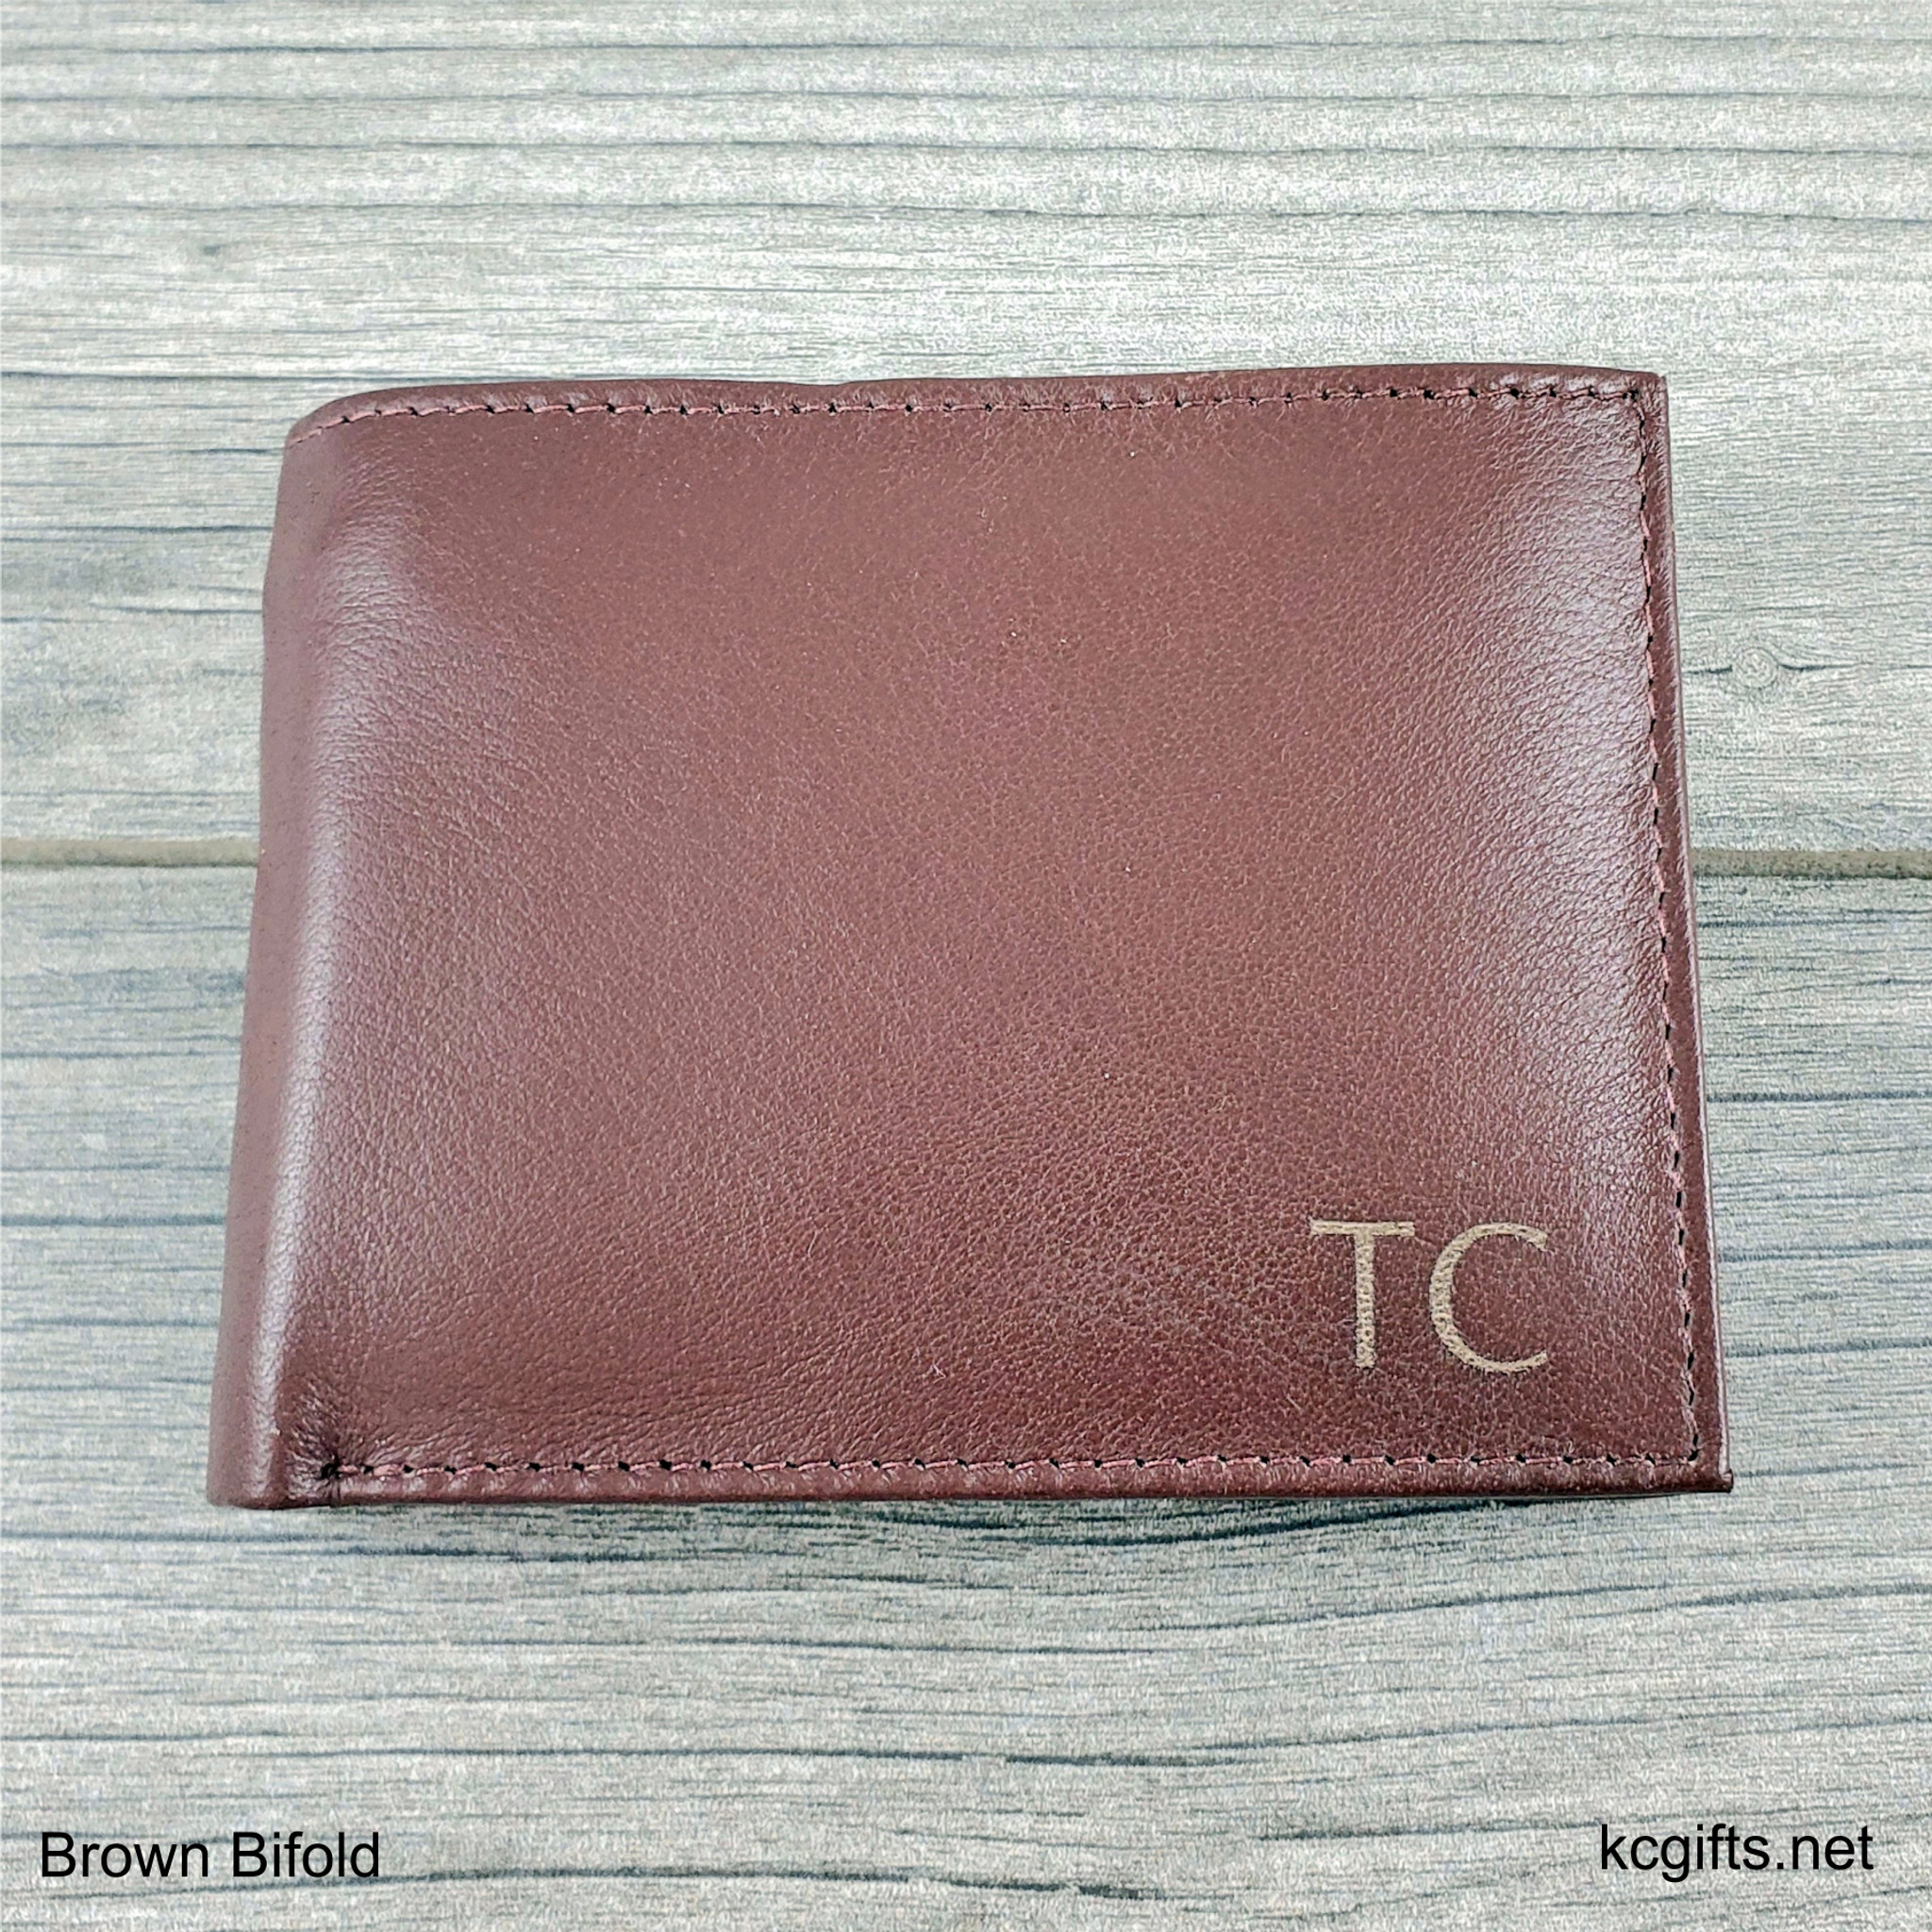 Personalized Leather RFID Wallet Engraved Genuine Leather 